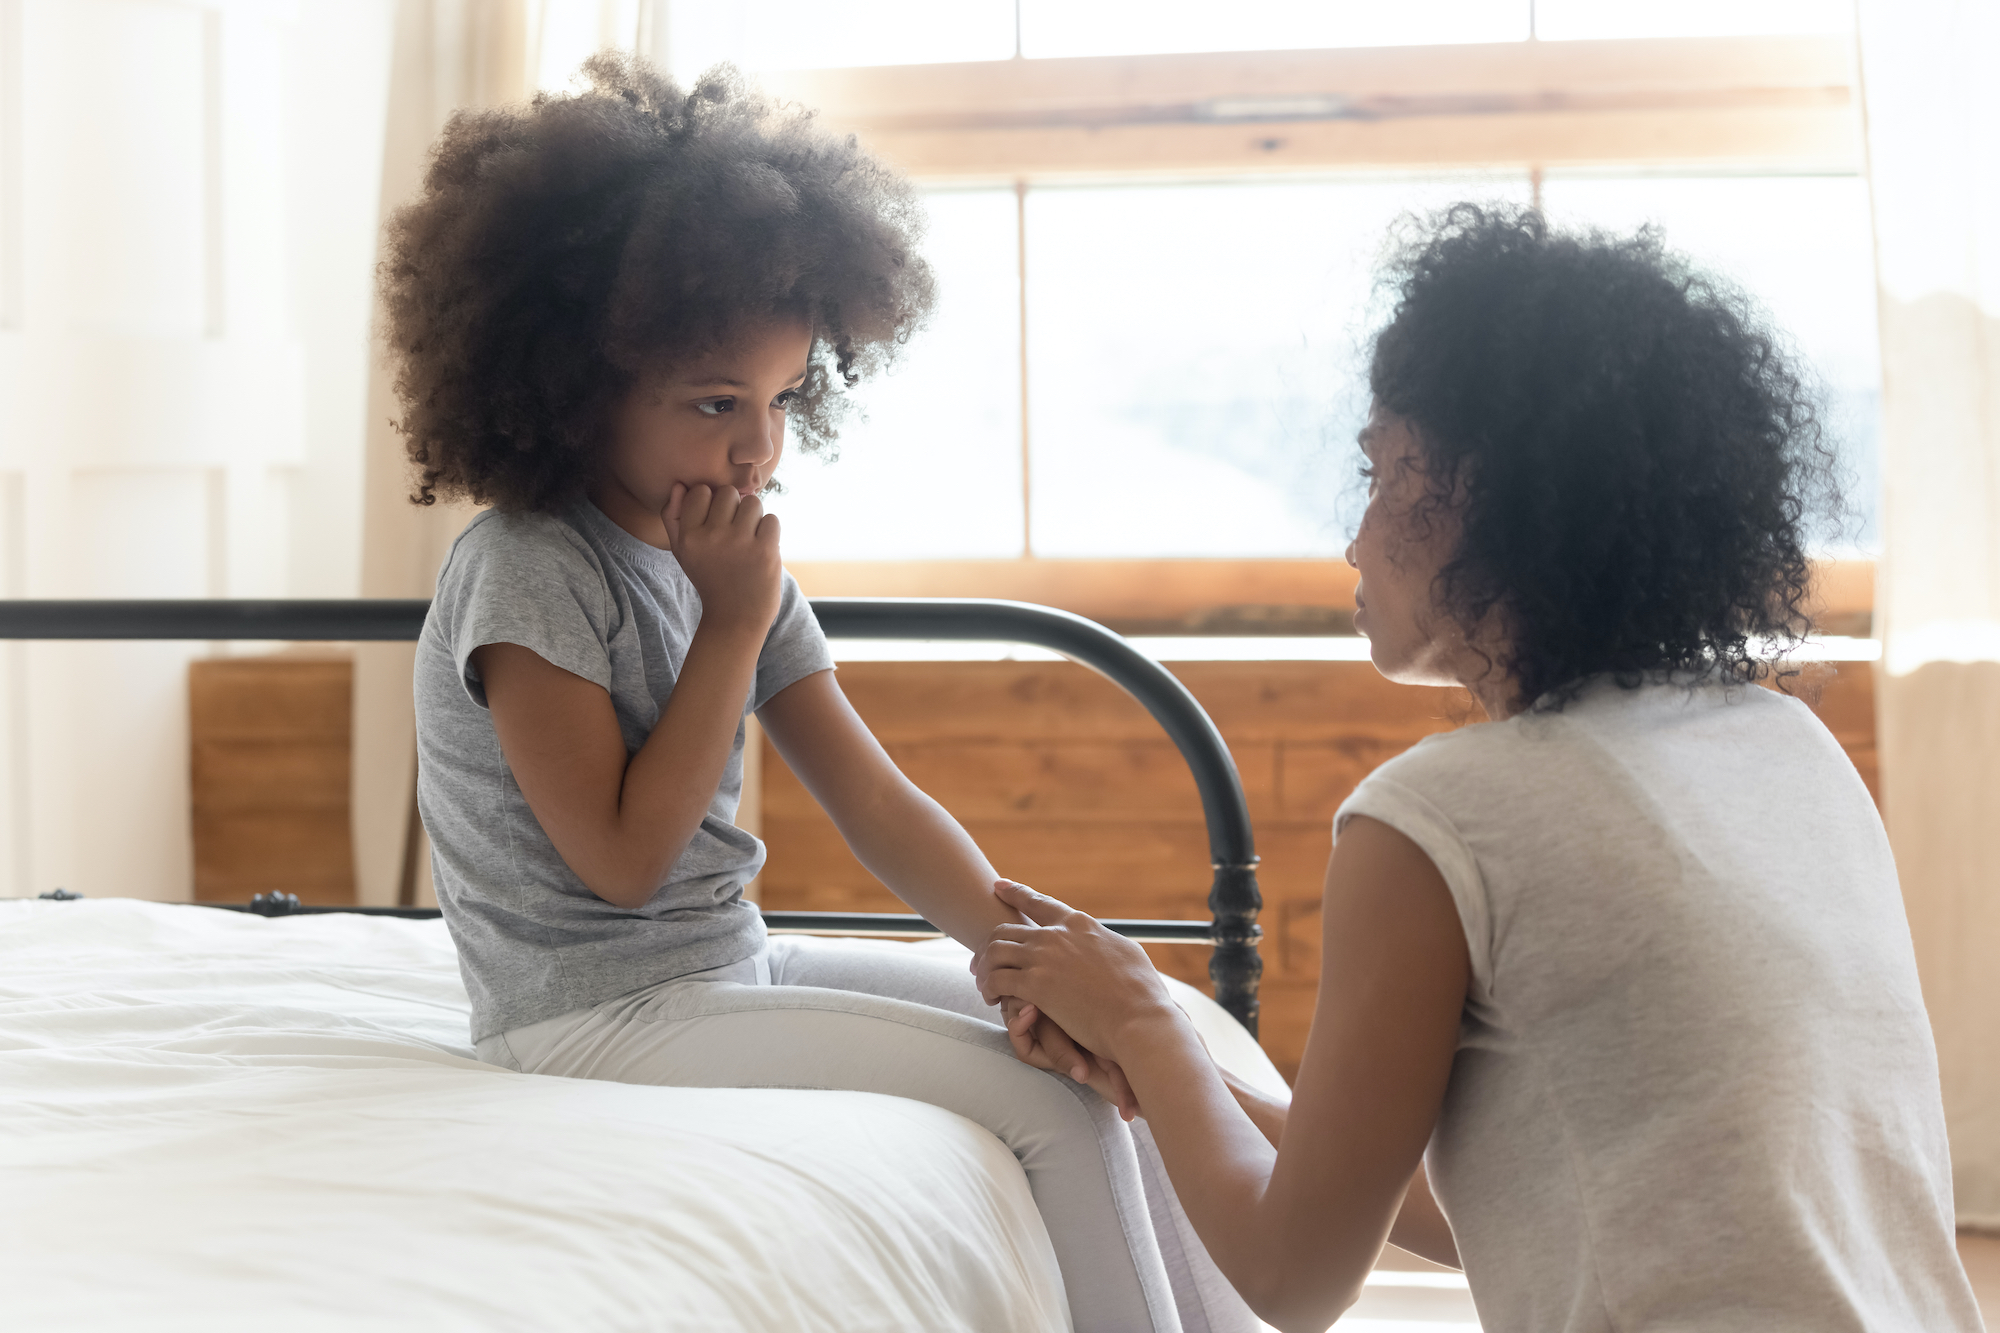 Little black girl sitting on a bed looking unsure and her mother is kneeling in front of her comforting her